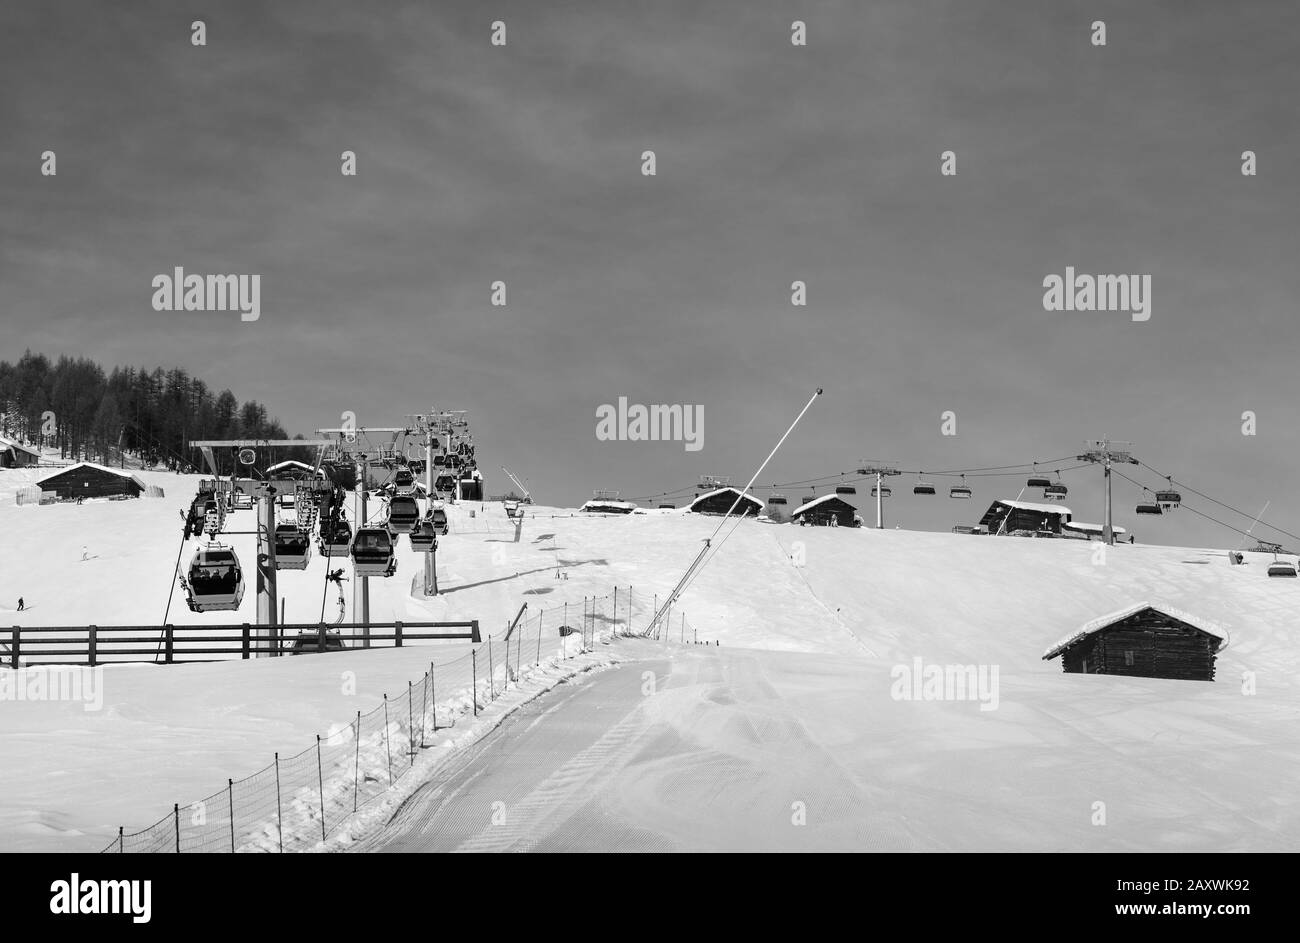 Black and white snowy ski track prepared with snow grooming machine, gondola lift, chair-lift, snow cannons at ski resort. Mountains in winter. Italia Stock Photo